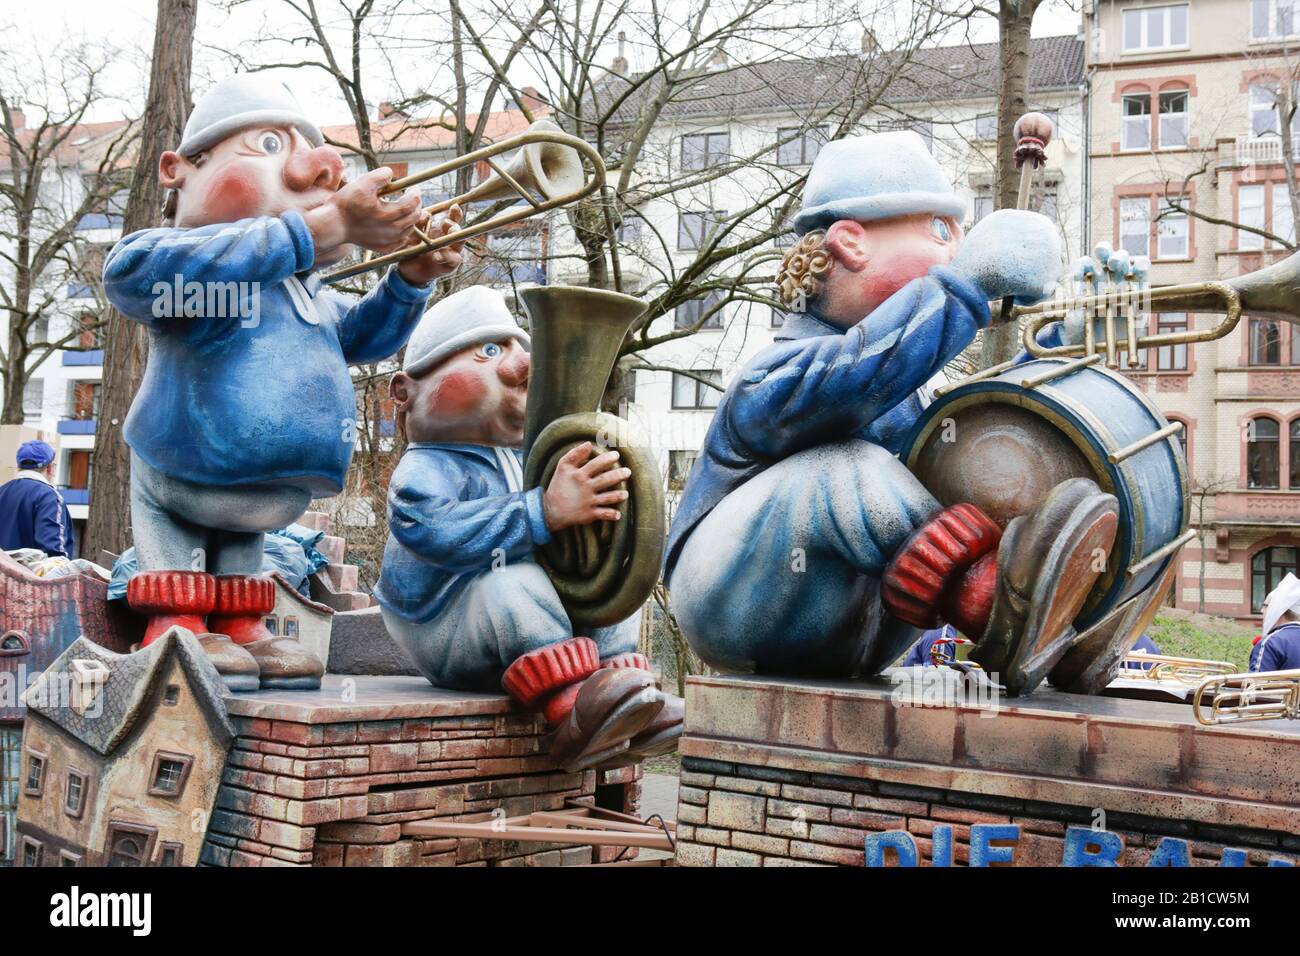 Mainz, Germany. 24th February 2020. Members of the Music show band 'Die Bauern' (The Farmers) are depicted on a float in the Mainz Rose Monday parade. Around half a million people lined the streets of Mainz for the traditional Rose Monday Carnival Parade. The 9 km long parade with over 9,000 participants is one of the three large Rose Monday Parades in Germany. Stock Photo